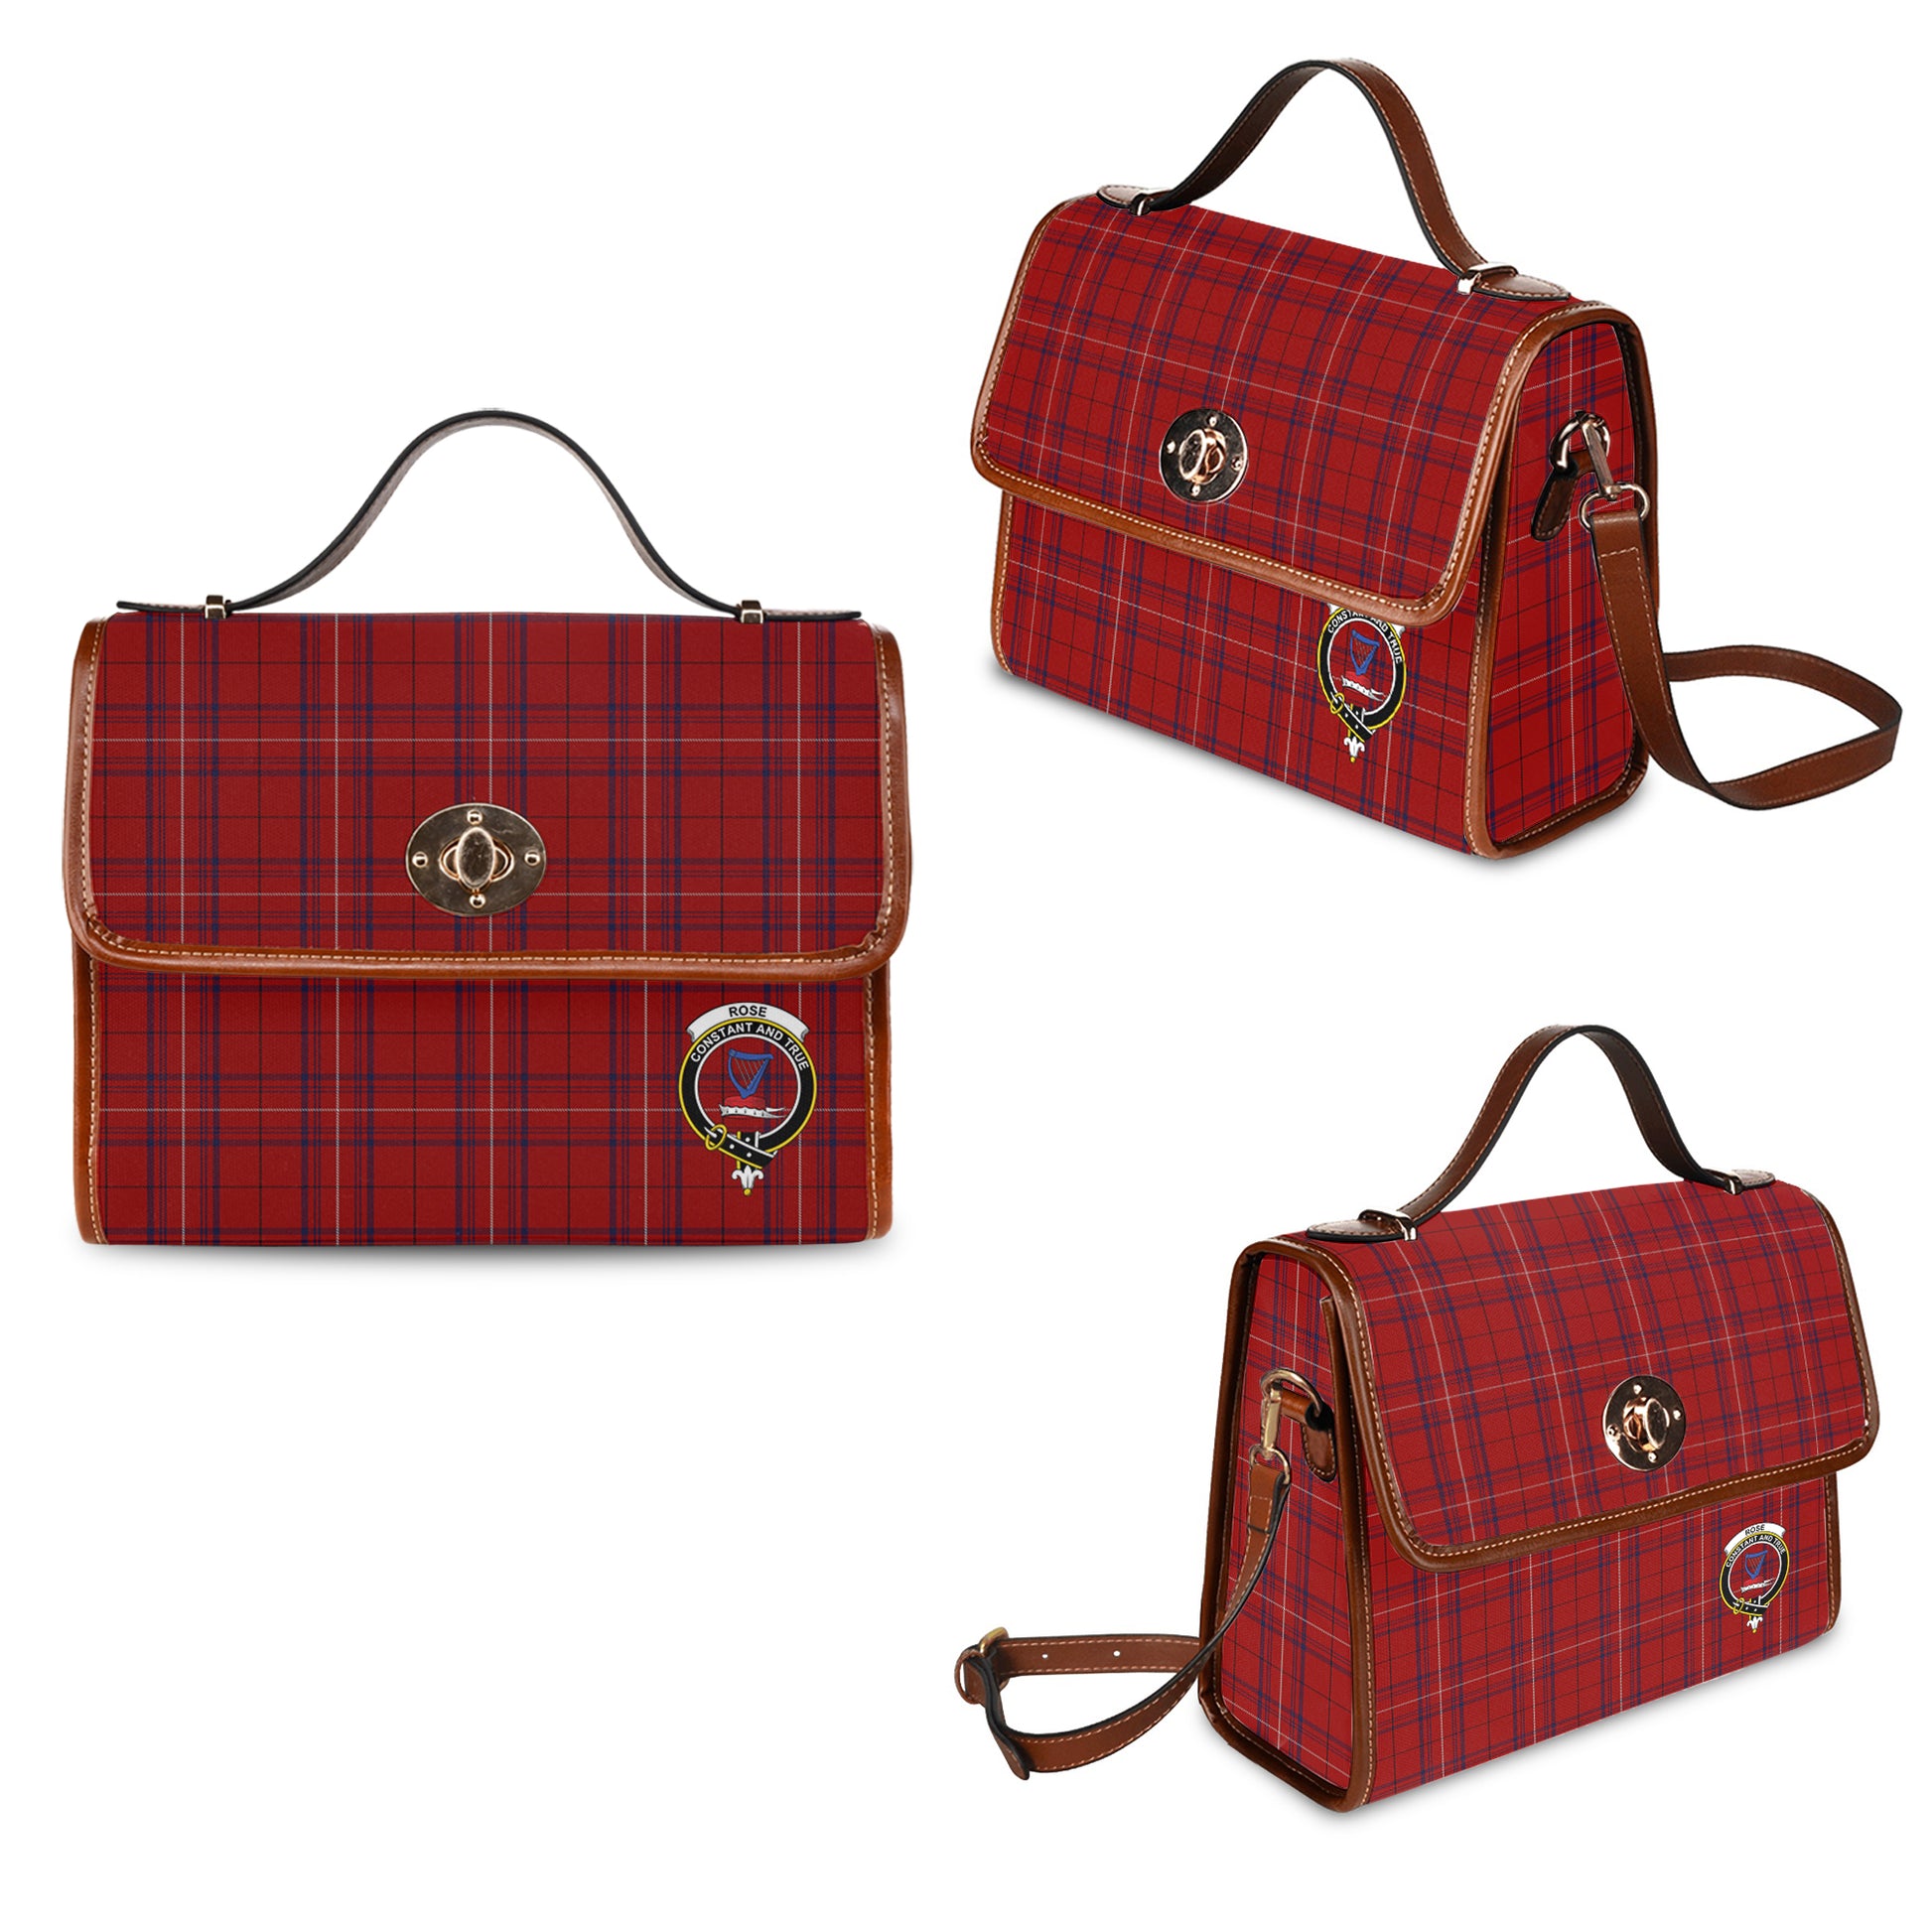 rose-of-kilravock-tartan-leather-strap-waterproof-canvas-bag-with-family-crest